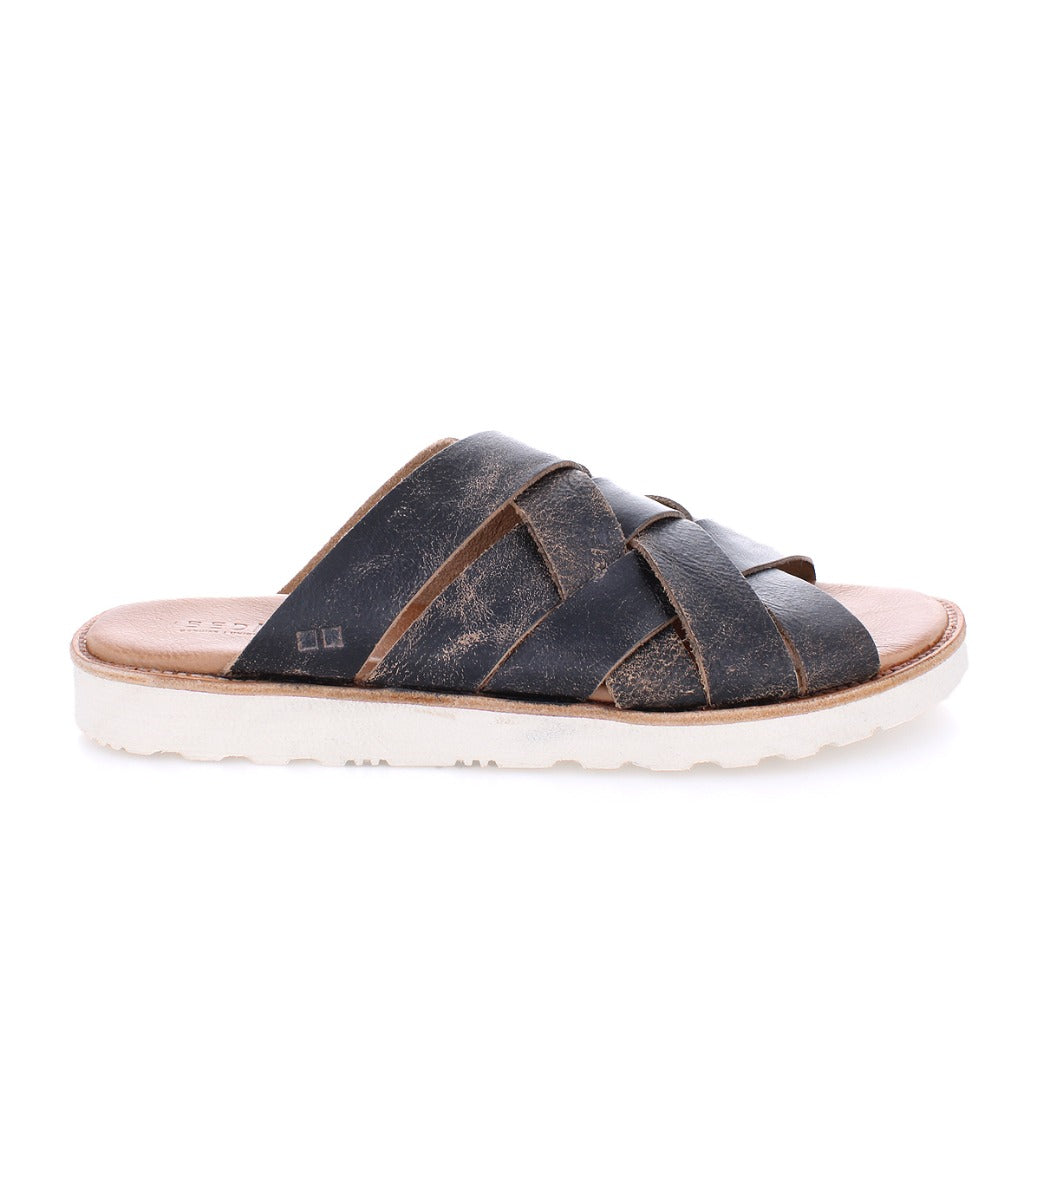 A single Abraham Light leather slide sandal with criss-cross straps, displayed against a white background. (Bed Stu)